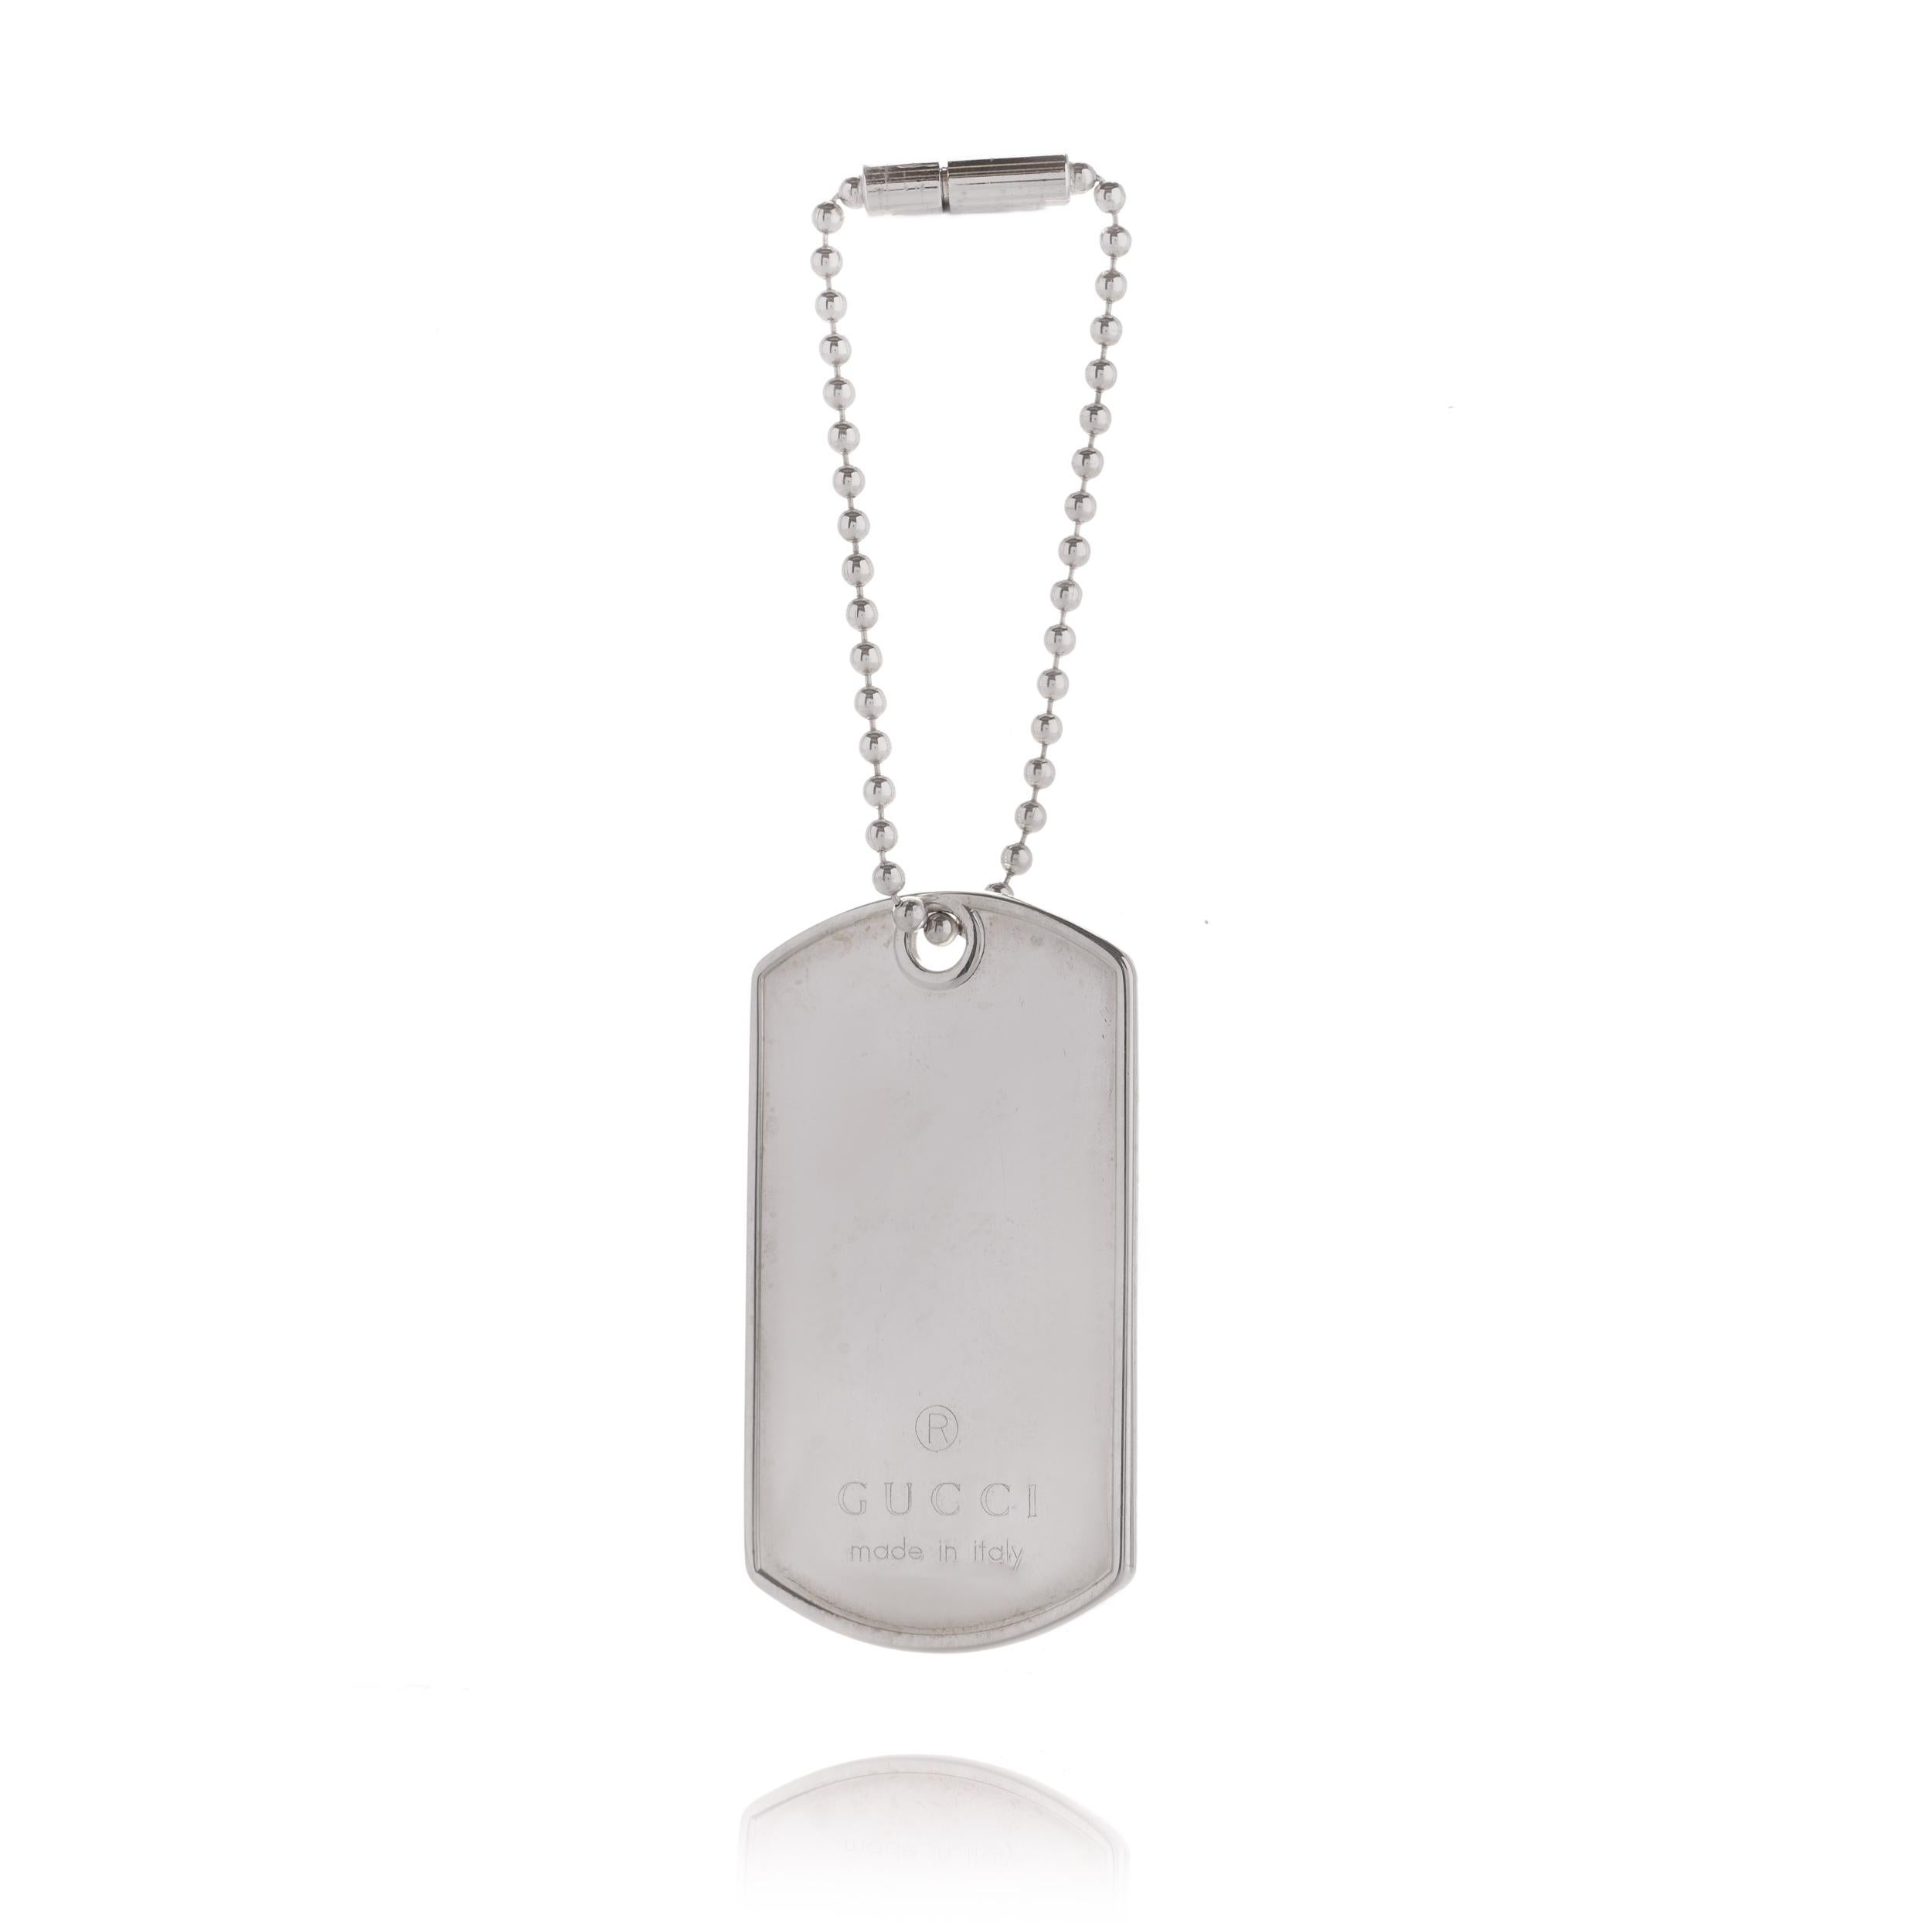 Gucci Sterling 925 Silver Dog Tag Pendant/ Bag charm. 
Designer / Maker: Gucci
Made in Italy, After 2000
Hallmarked with Gucci logo, 925 silver, Italian hallmarks. 

Dimensions -
Chain length: 12.1 cm
Tag Pendant size: Length x width x depth: 4.9 x